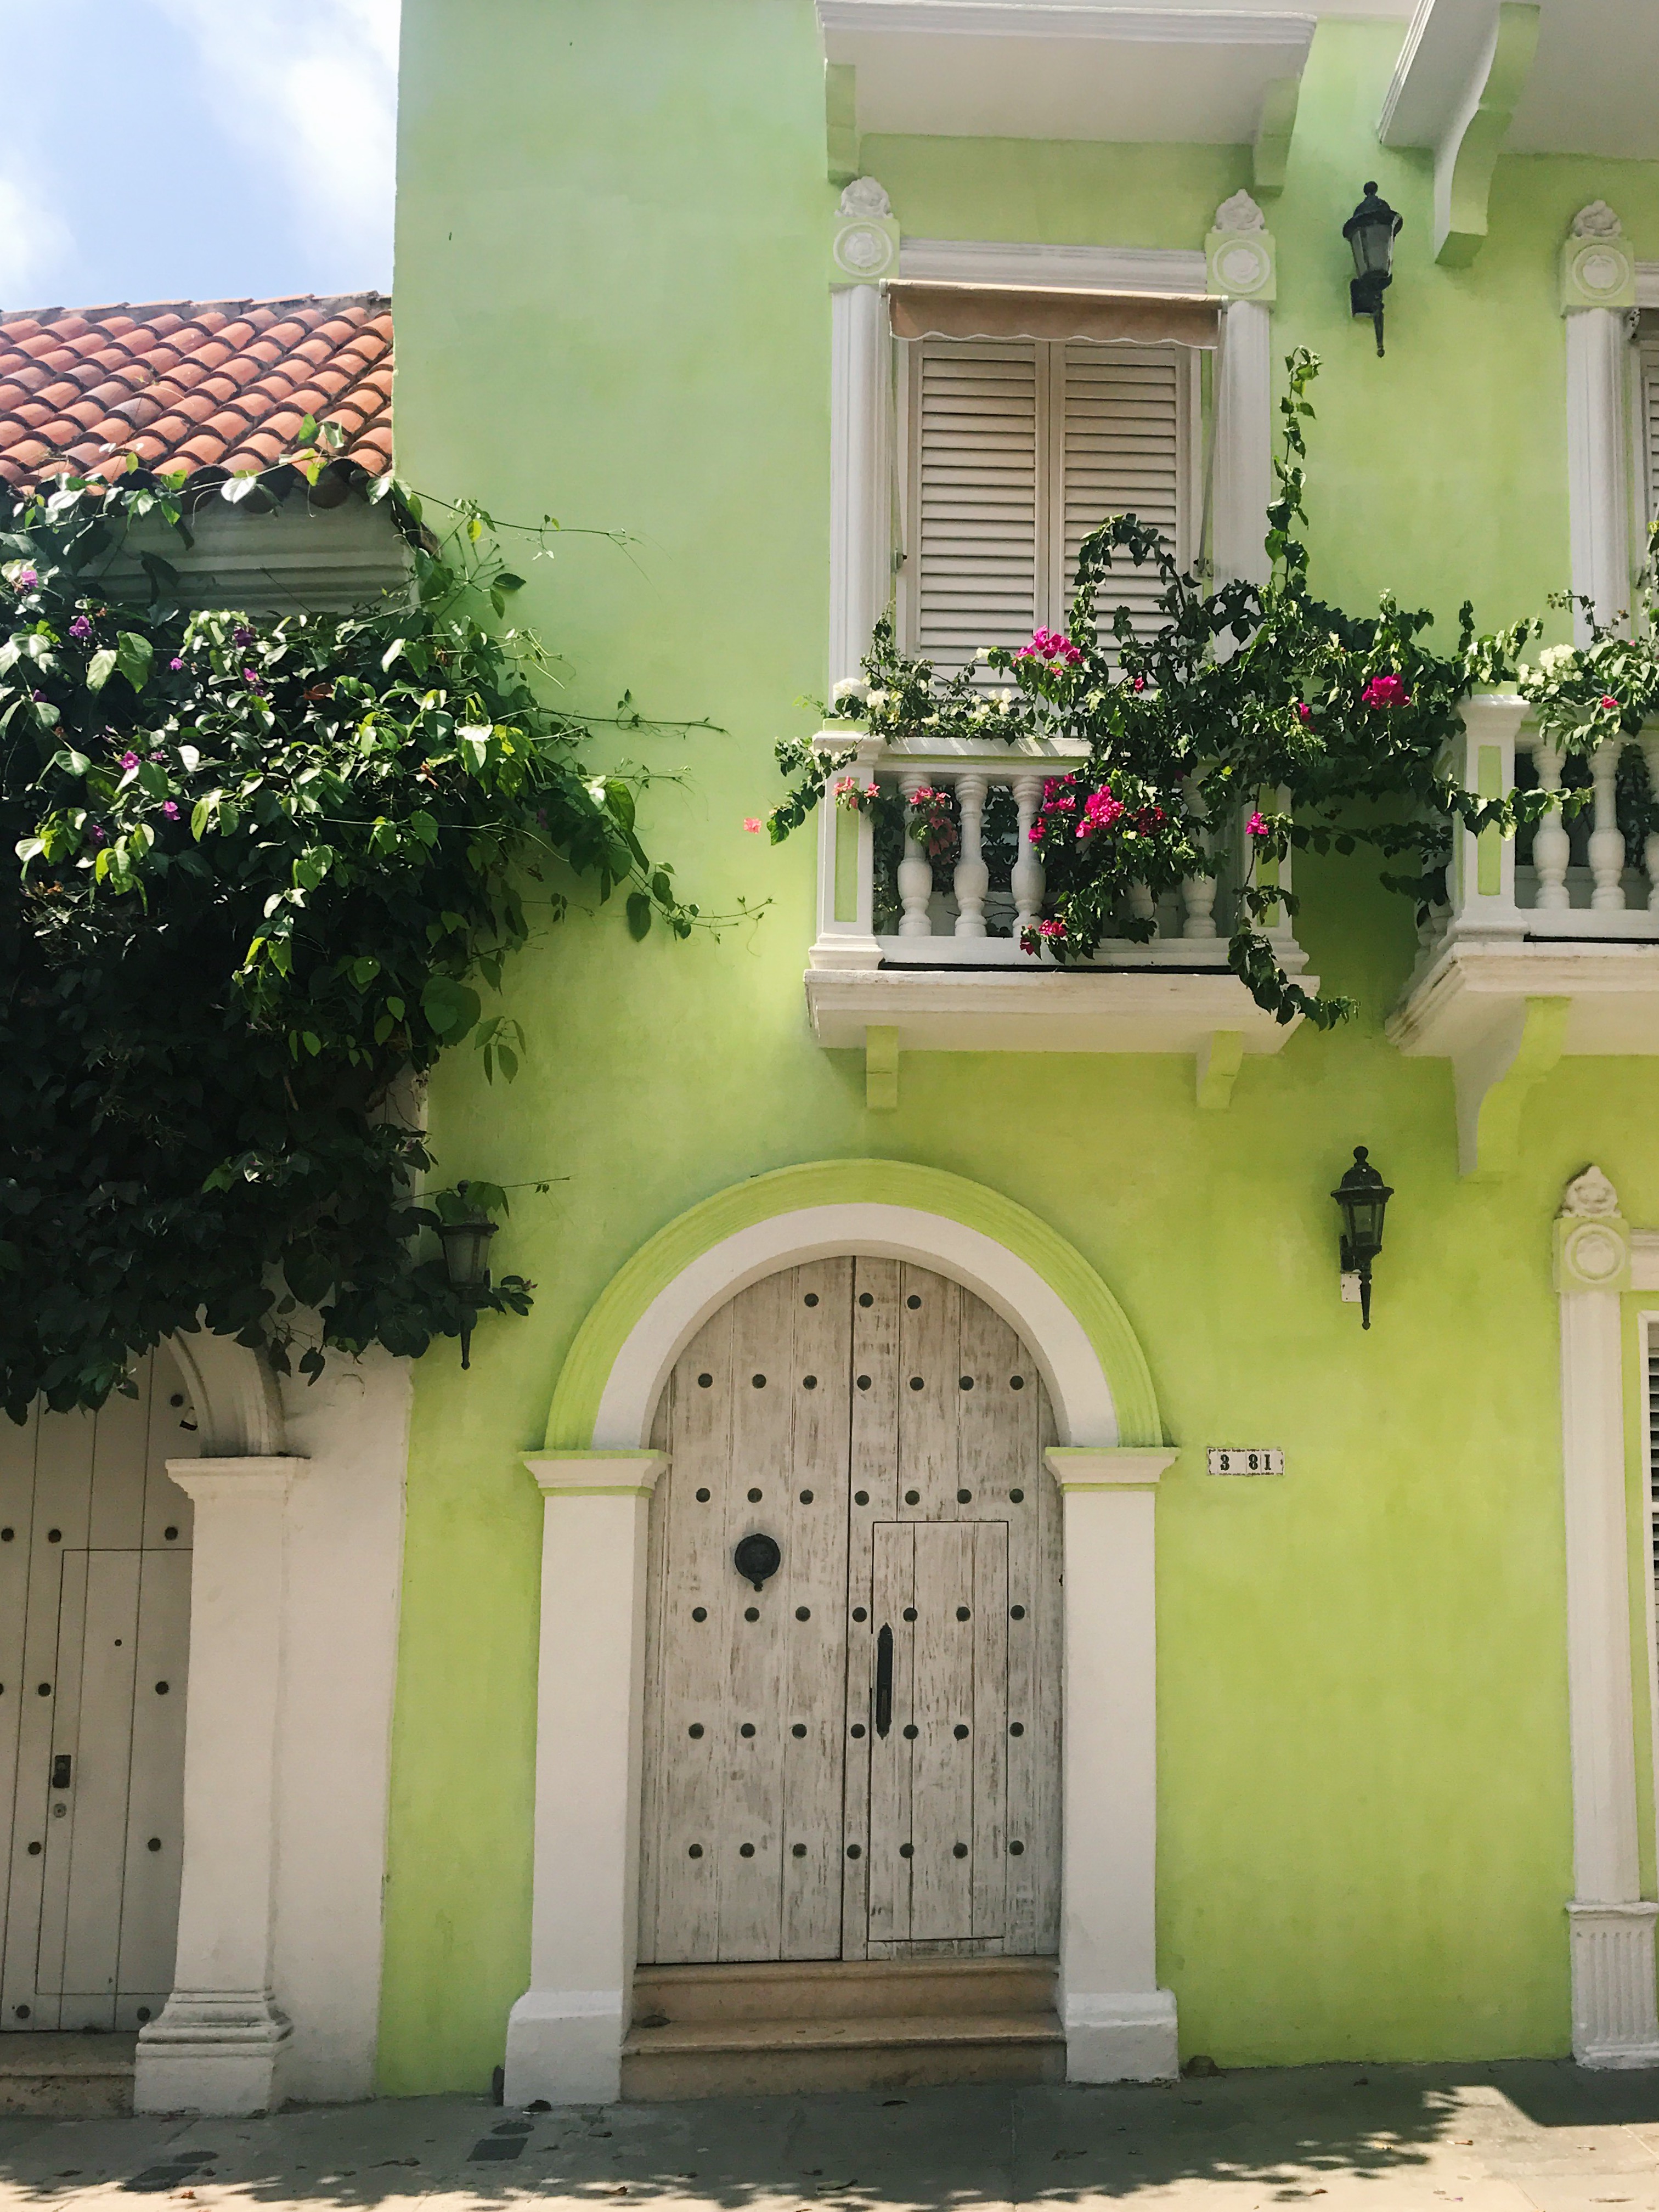 Your Guide to Cartagena // My Favorite Places to Eat, Drink and Dance in Colombia's Cartagena.